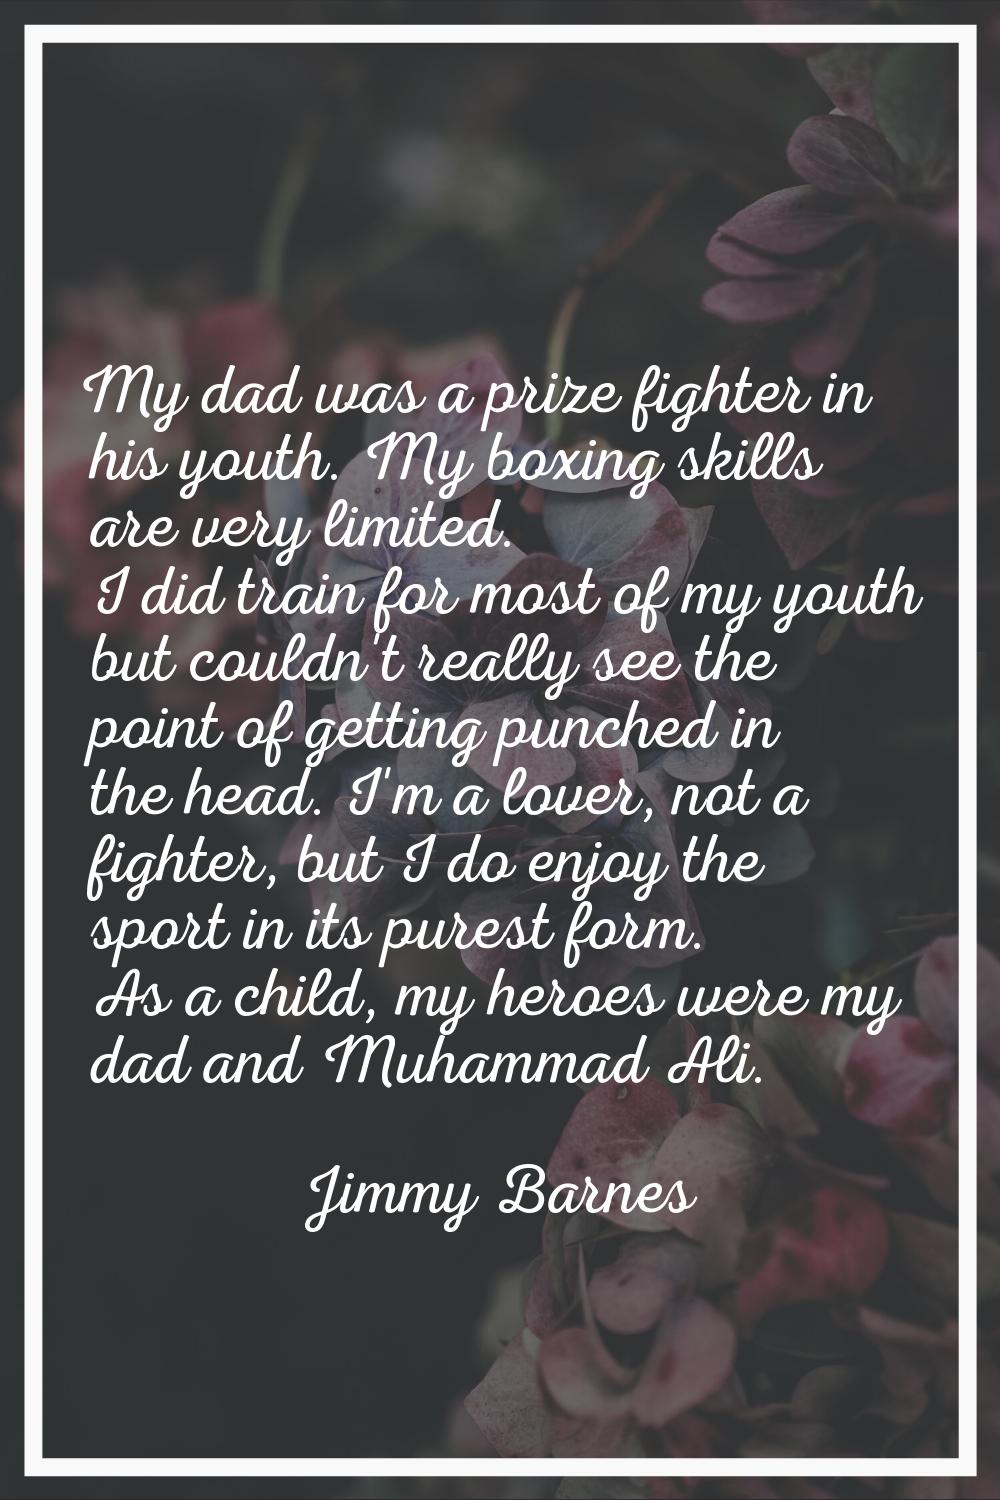 My dad was a prize fighter in his youth. My boxing skills are very limited. I did train for most of